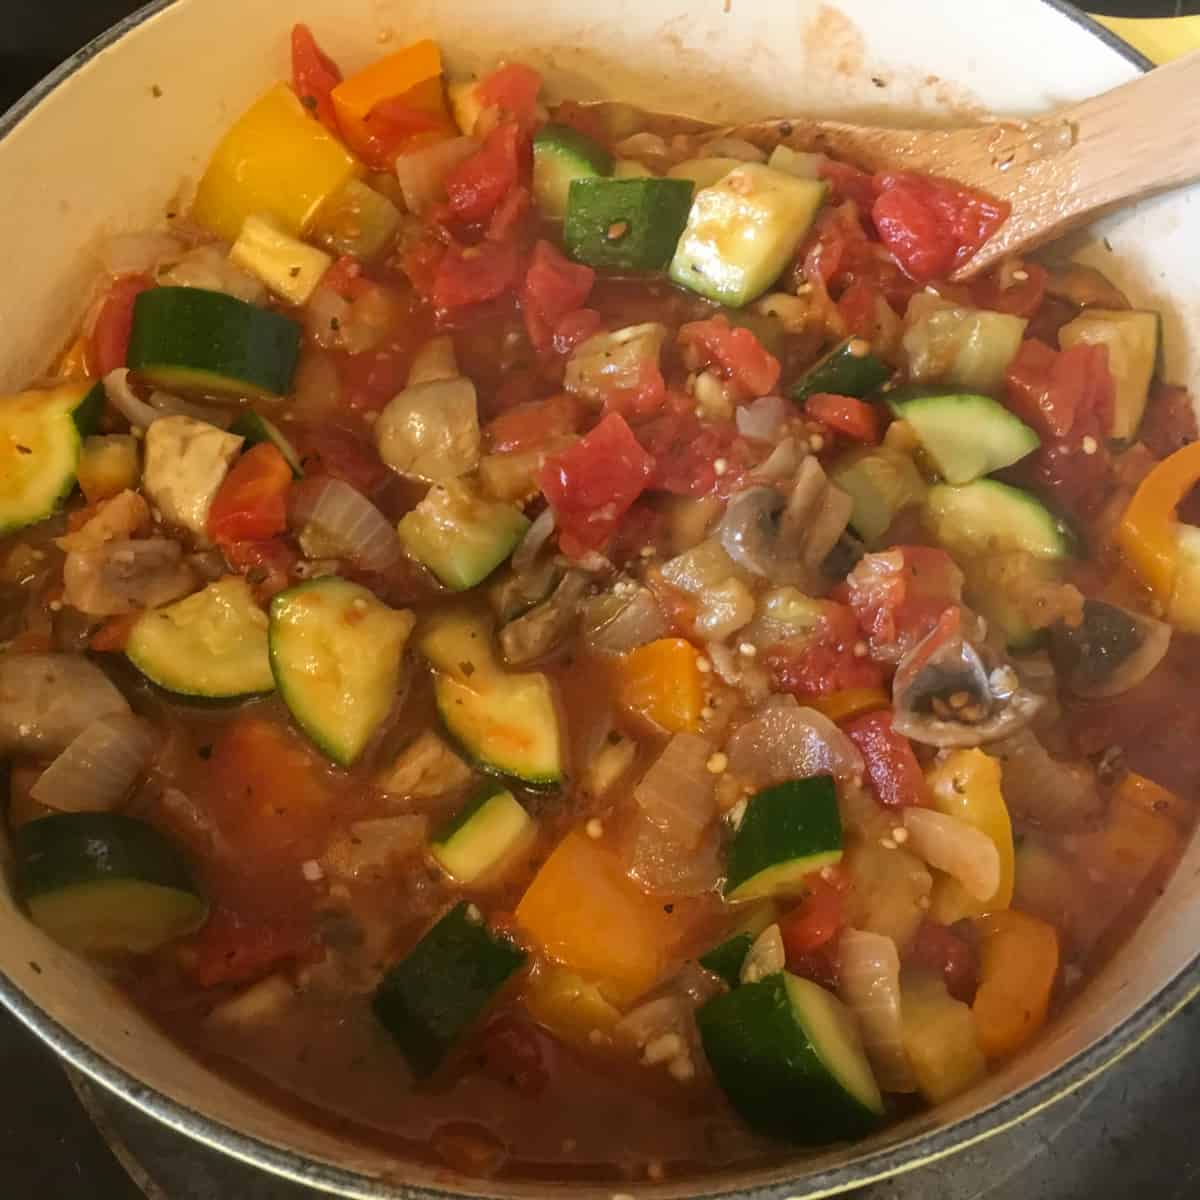 Ratatouille after it has been simmering for about 30 minutes.